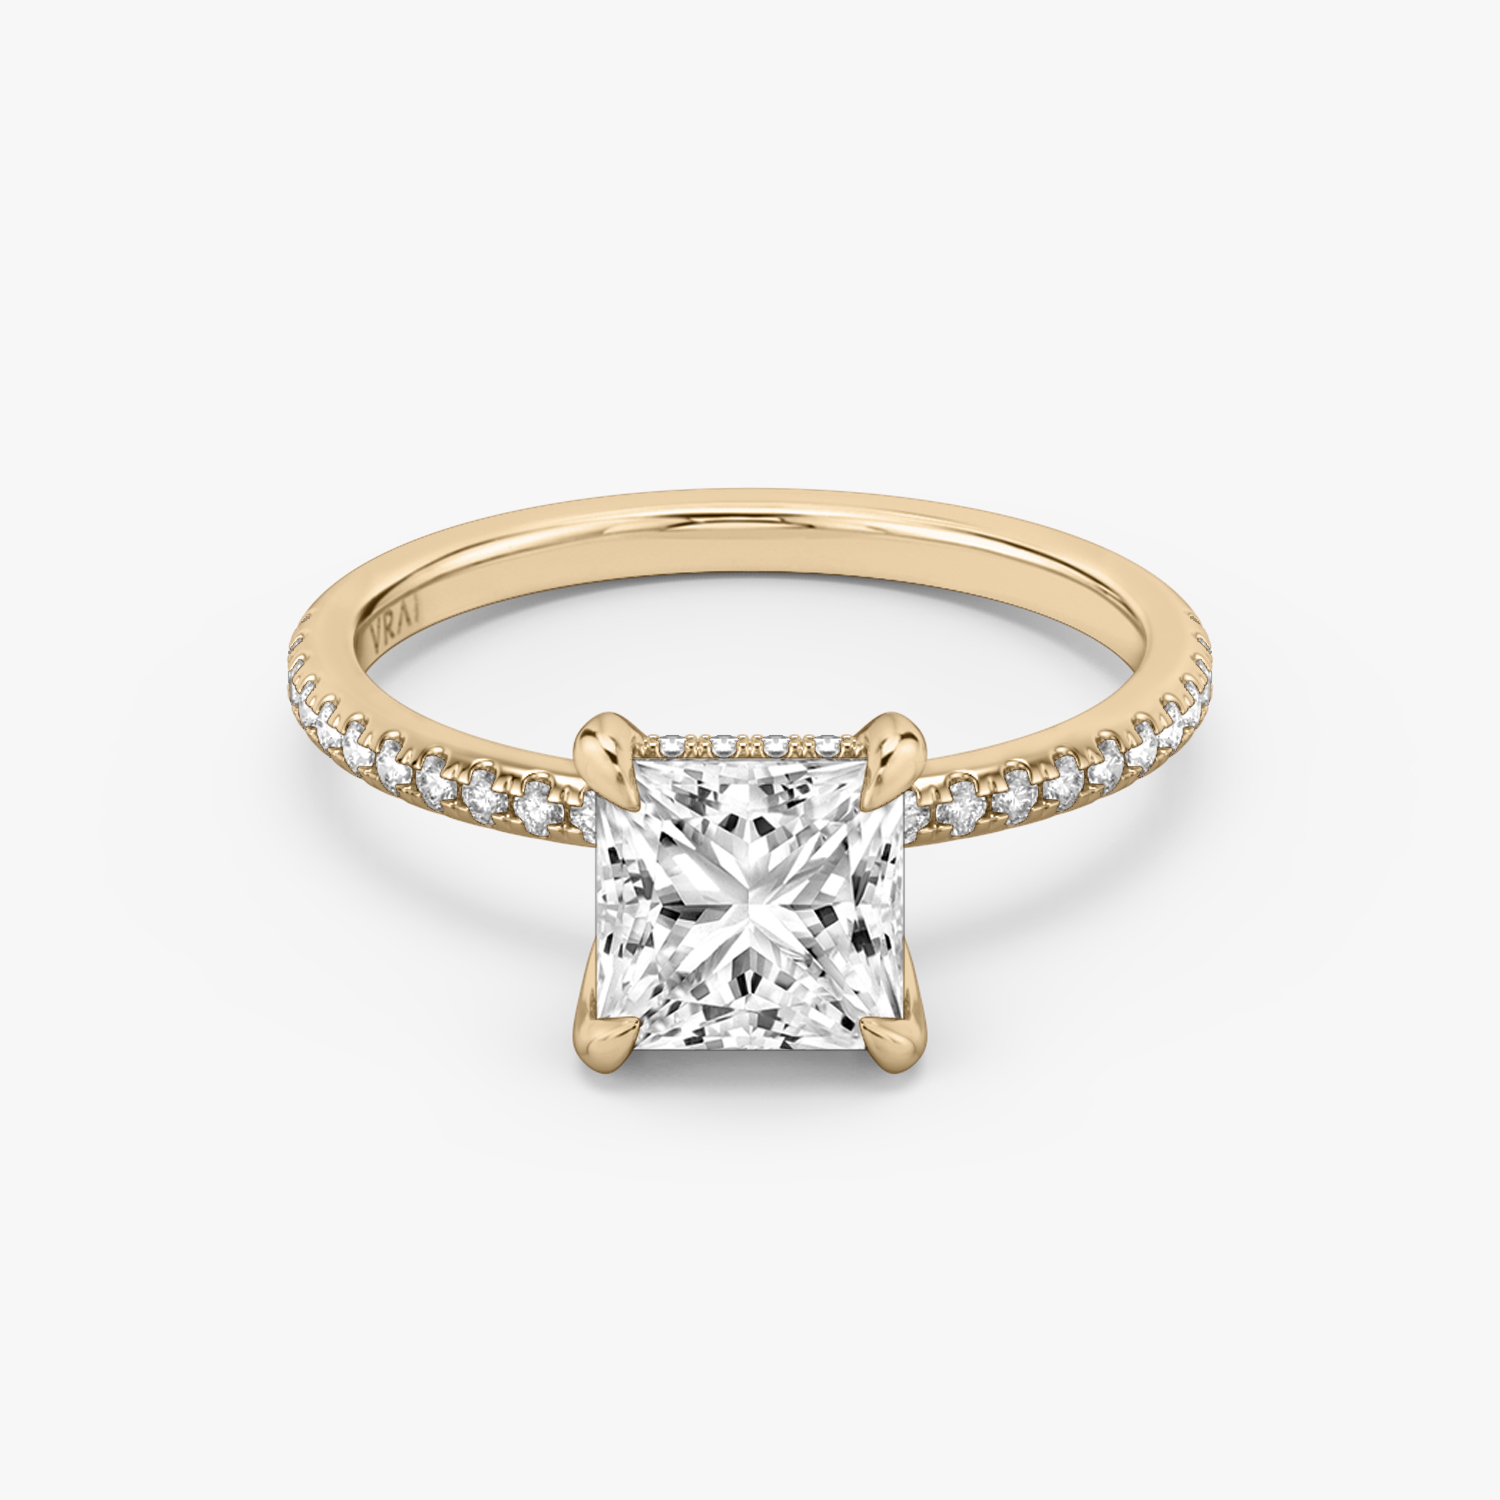 What Does Princess Cut Engagement Rings Mean? - SHINY CIRCLE